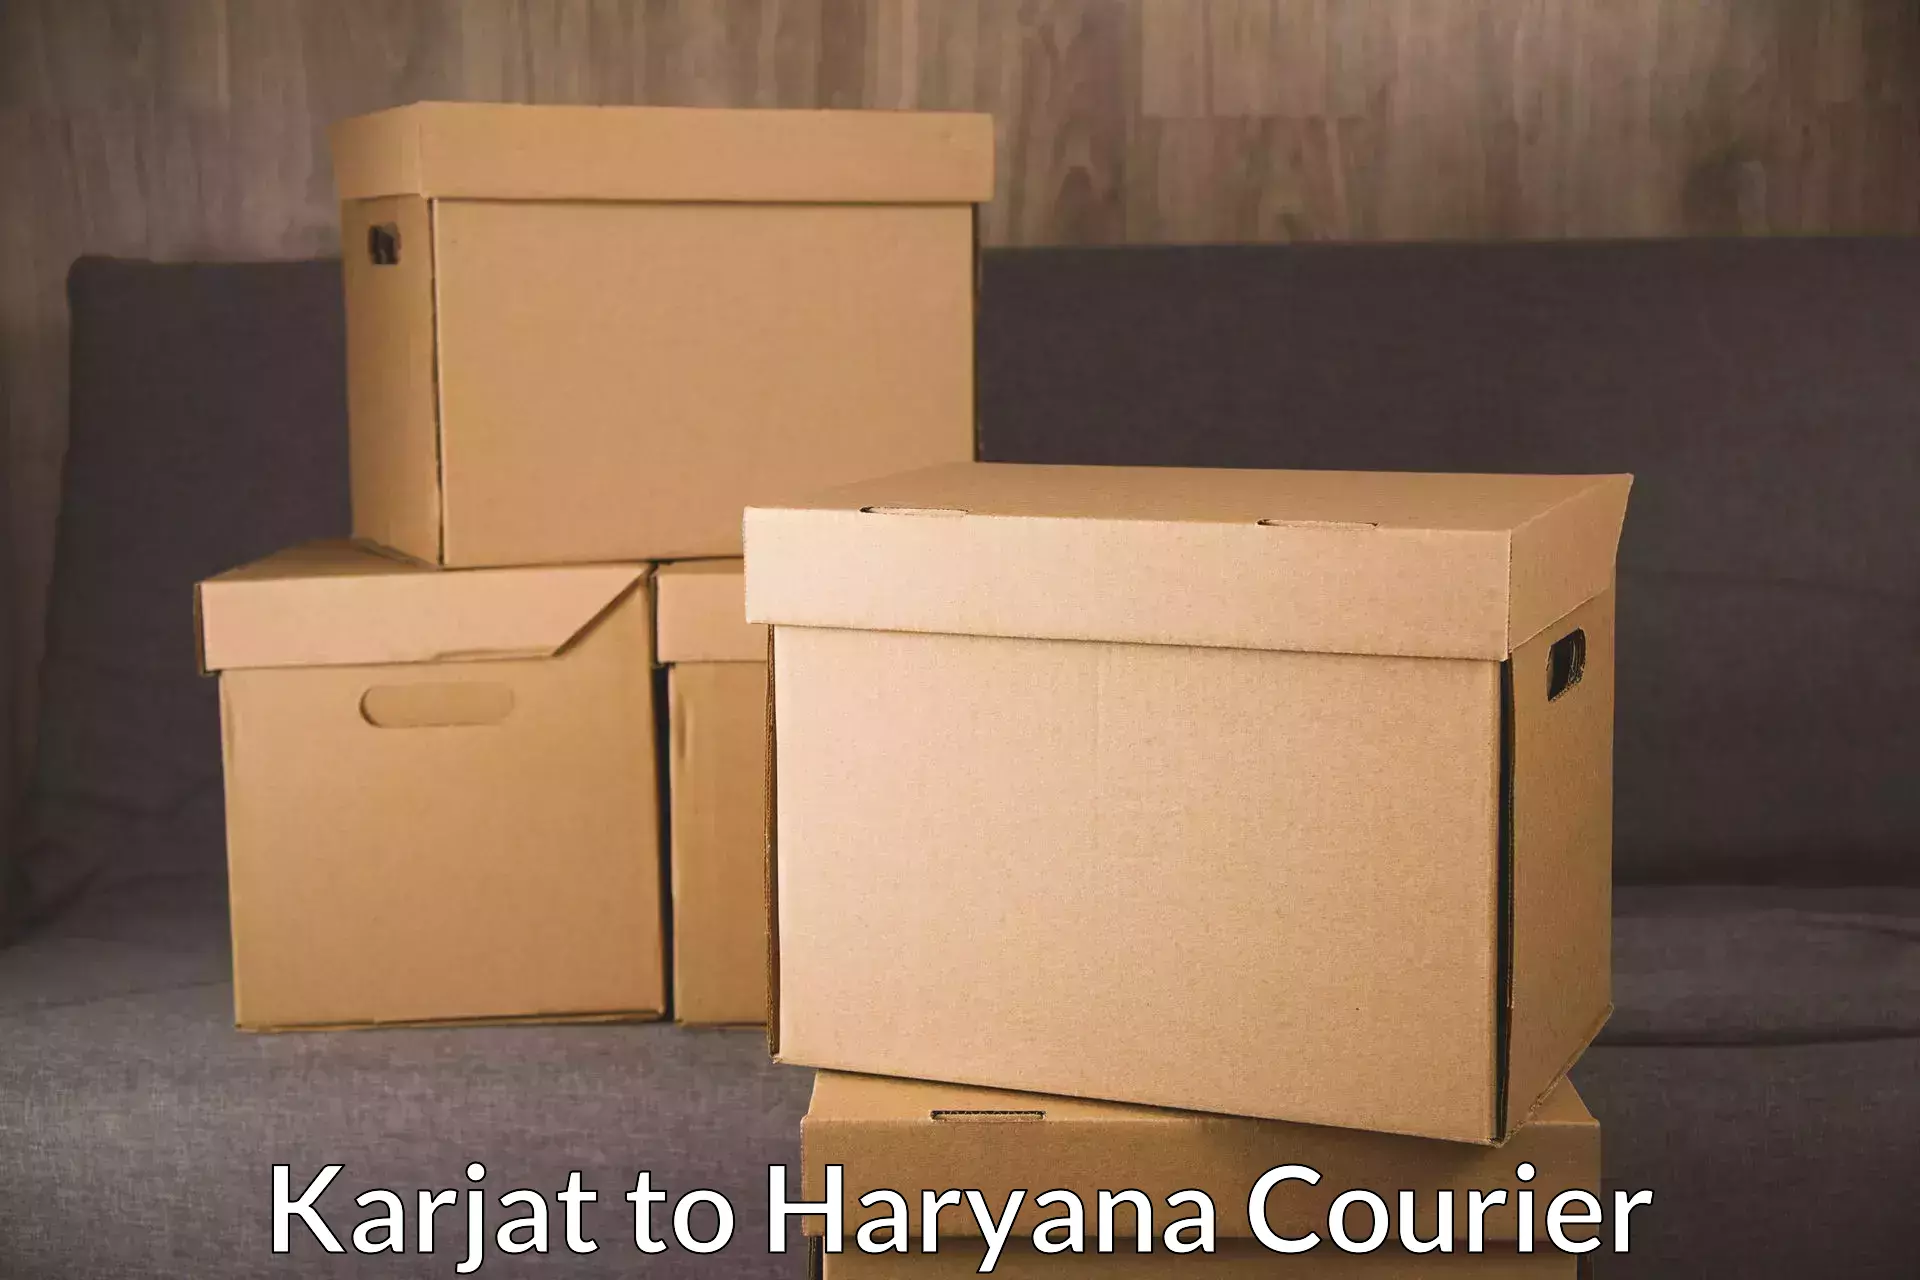 Same-day delivery options Karjat to Ambala